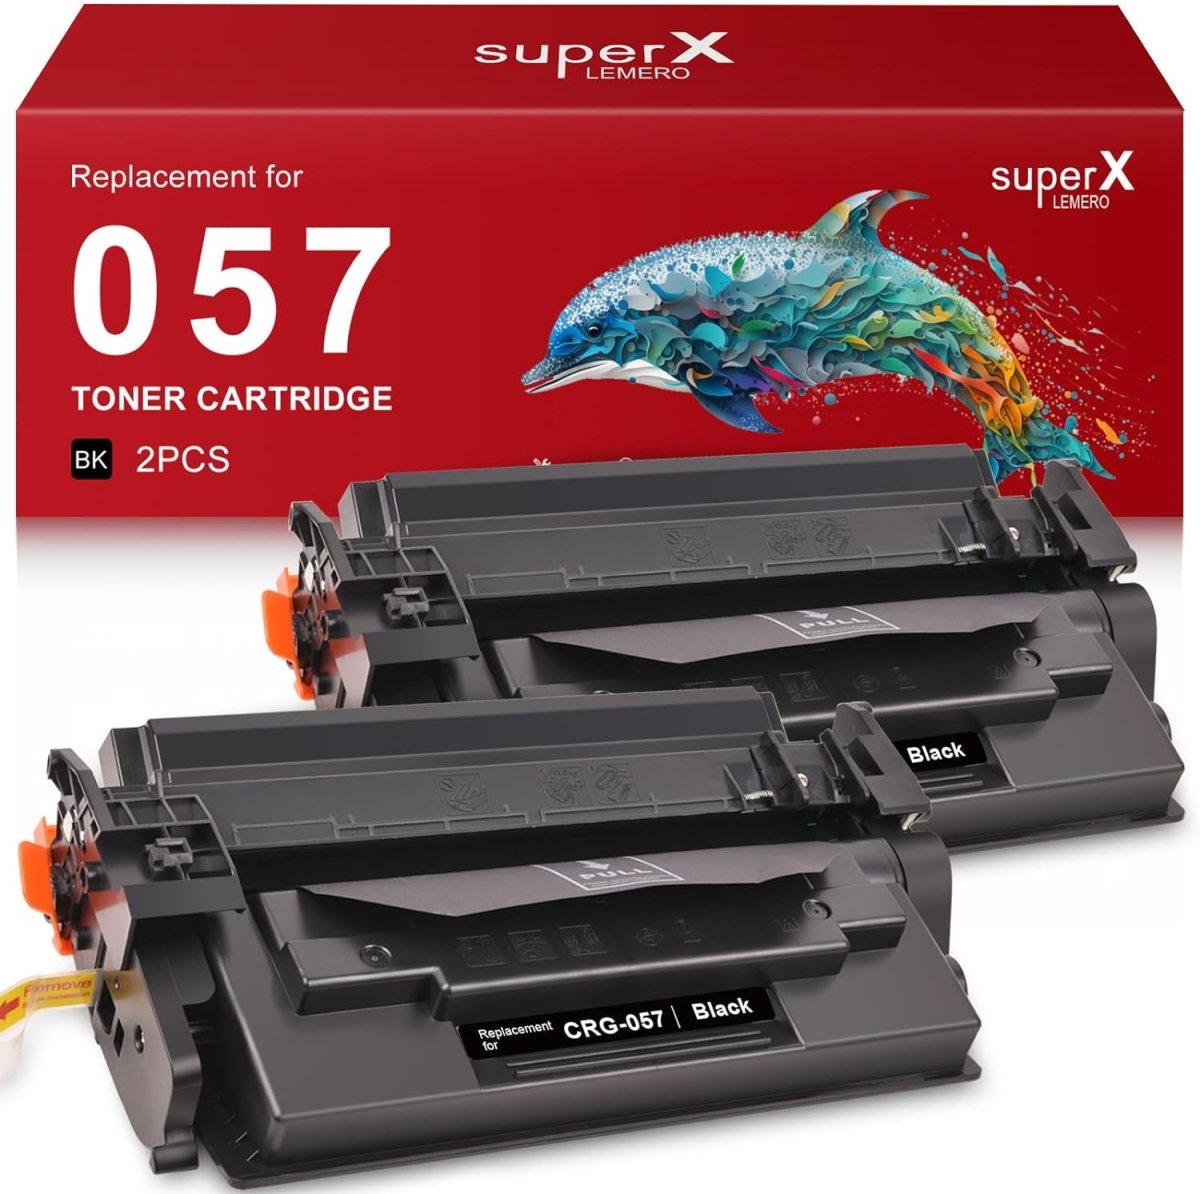 057 Black Toner Cartridge Compatible with Canon Printer, 2-Pack - Linford Office:Printer Ink & Toner CartridgeCanon 057 Toner Cartridge Compatible 3009C001 Black 2-Pack